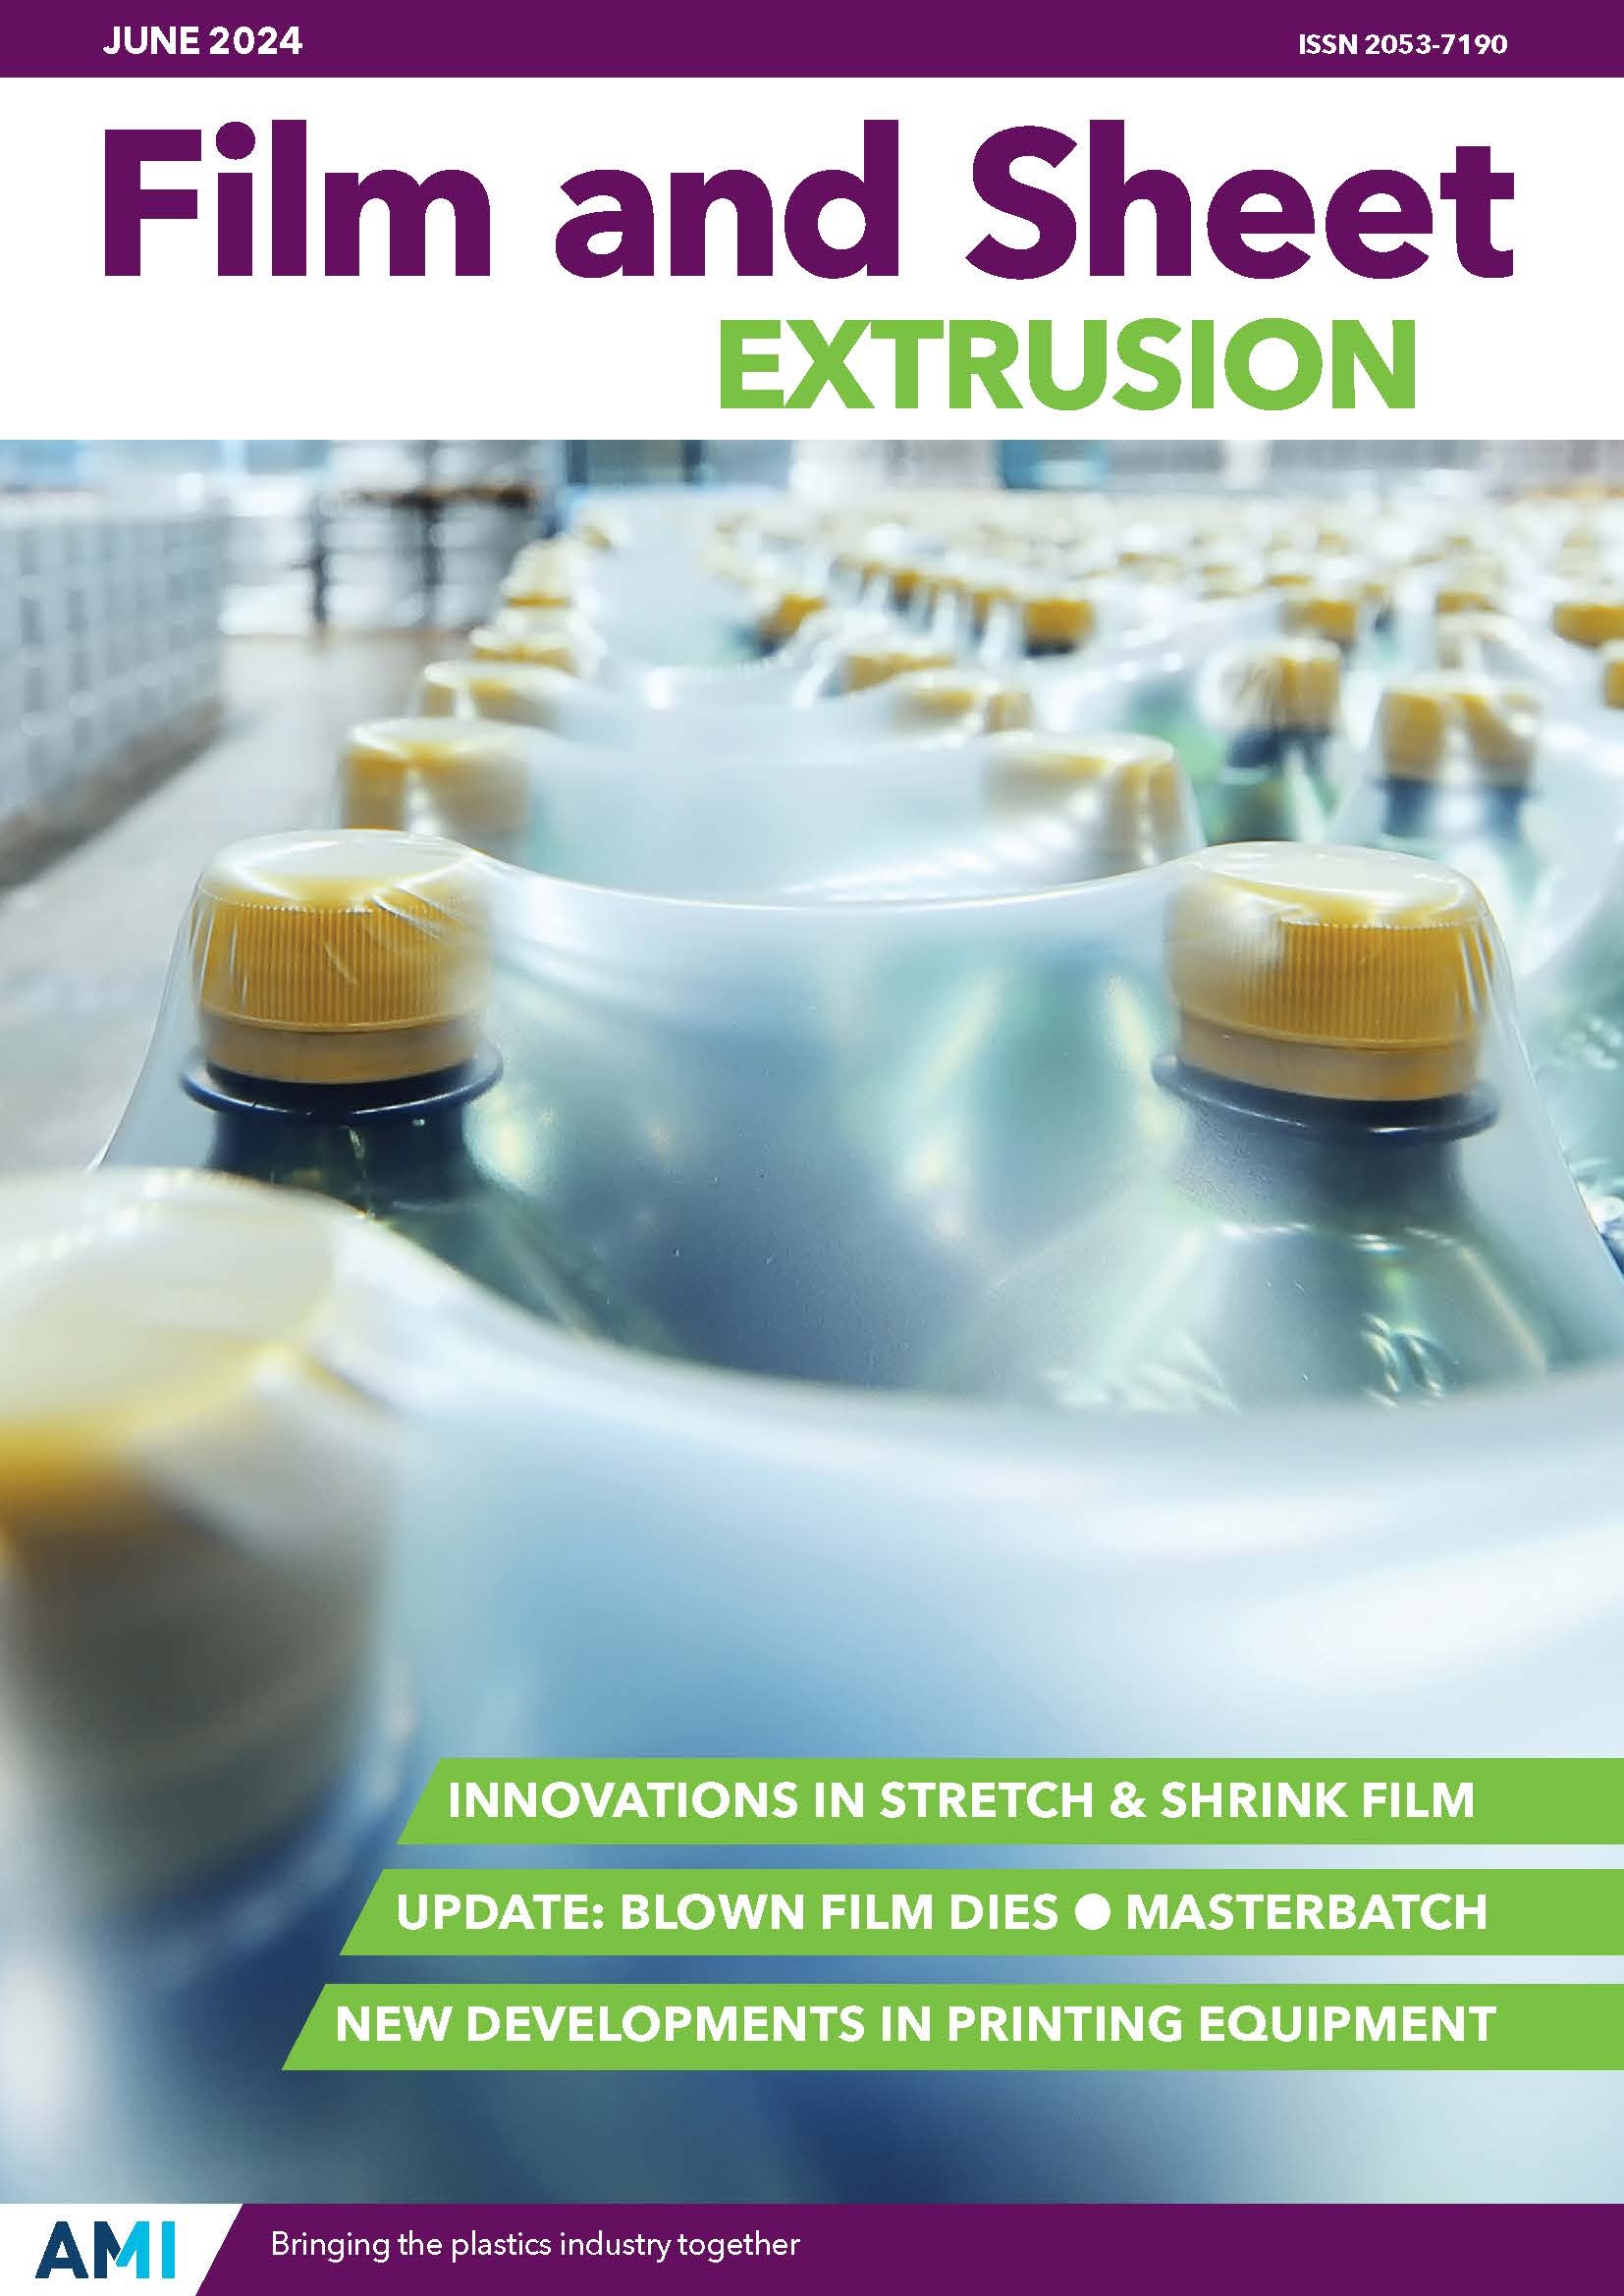 Film and Sheet Extrusion Magazine June 2024